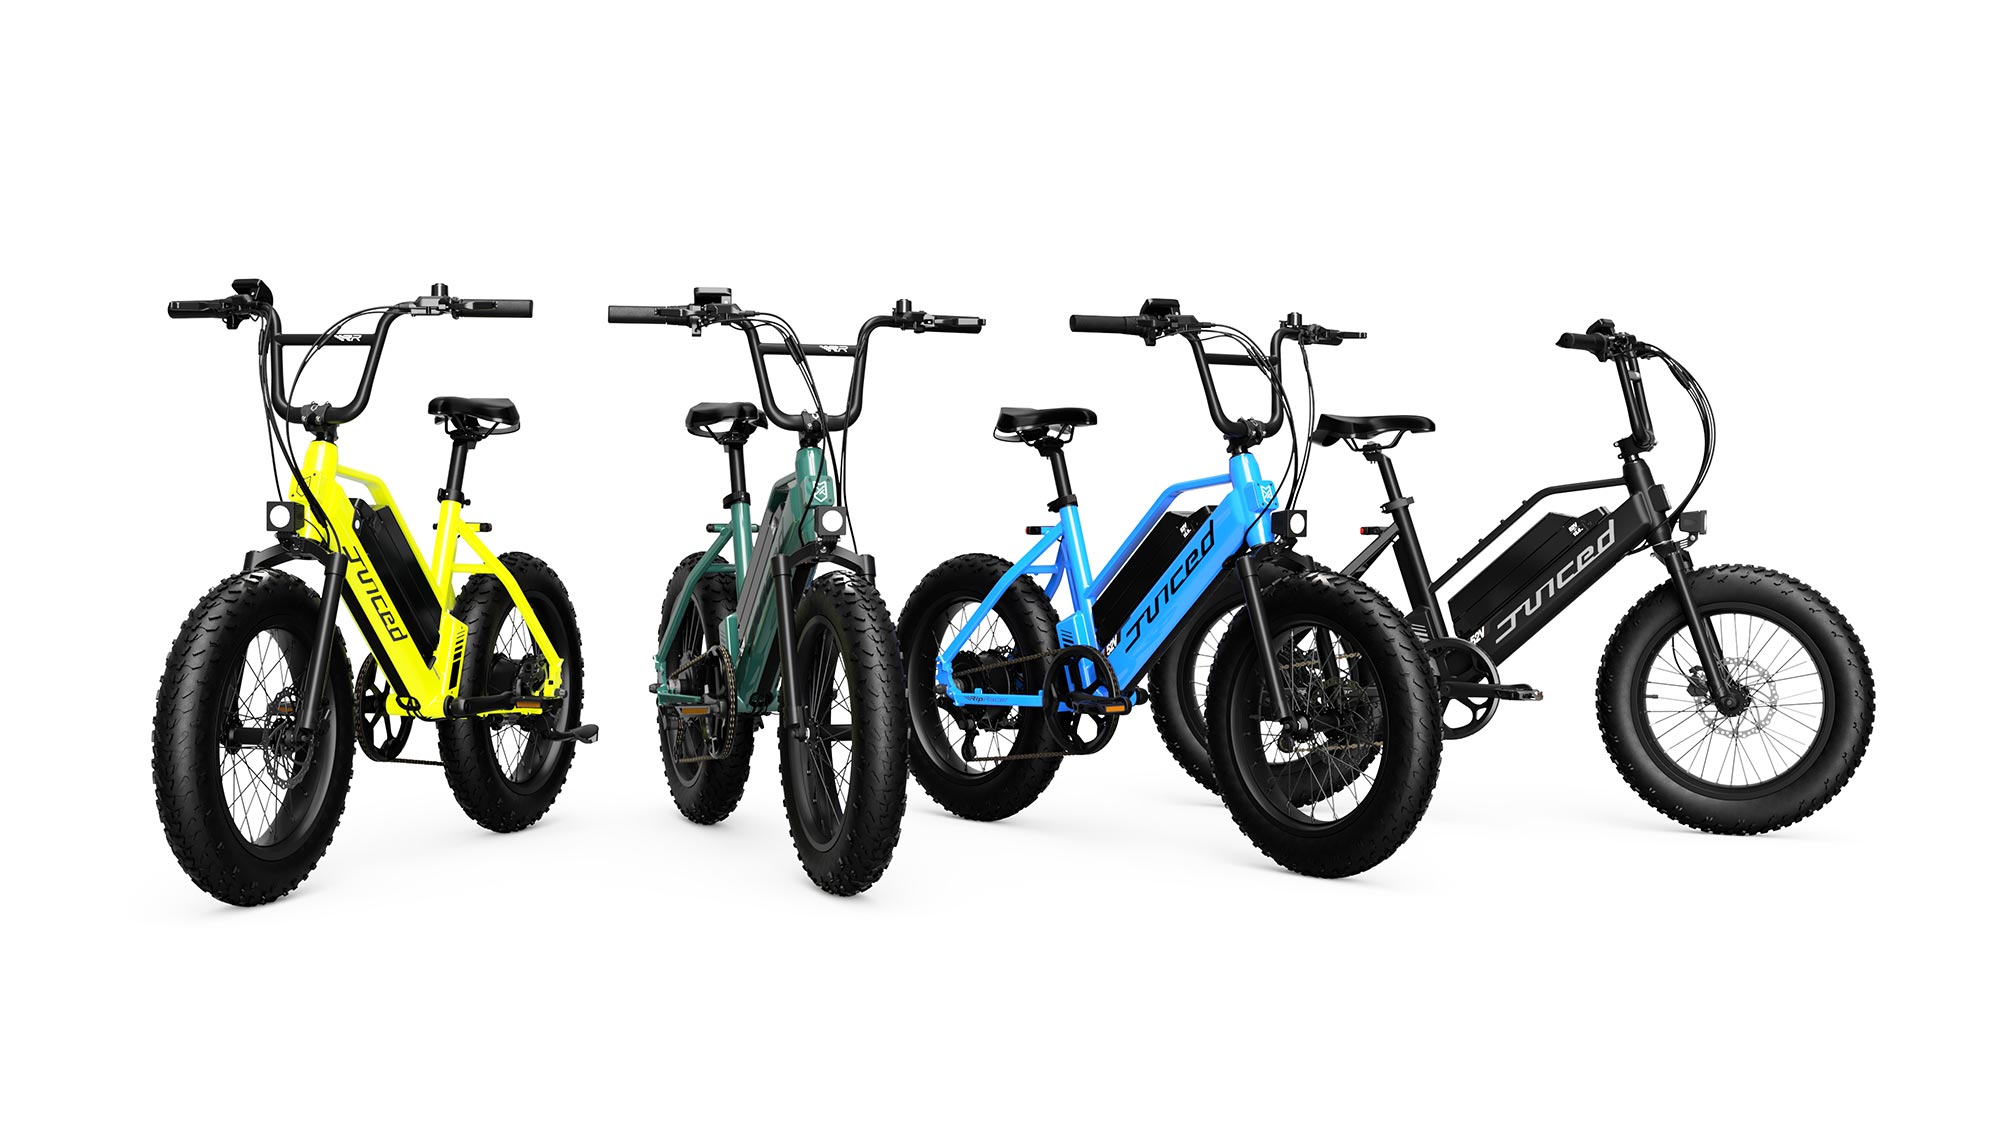 The RipRacer comes in four colors and was discounted to $1,299 at our time of publication.